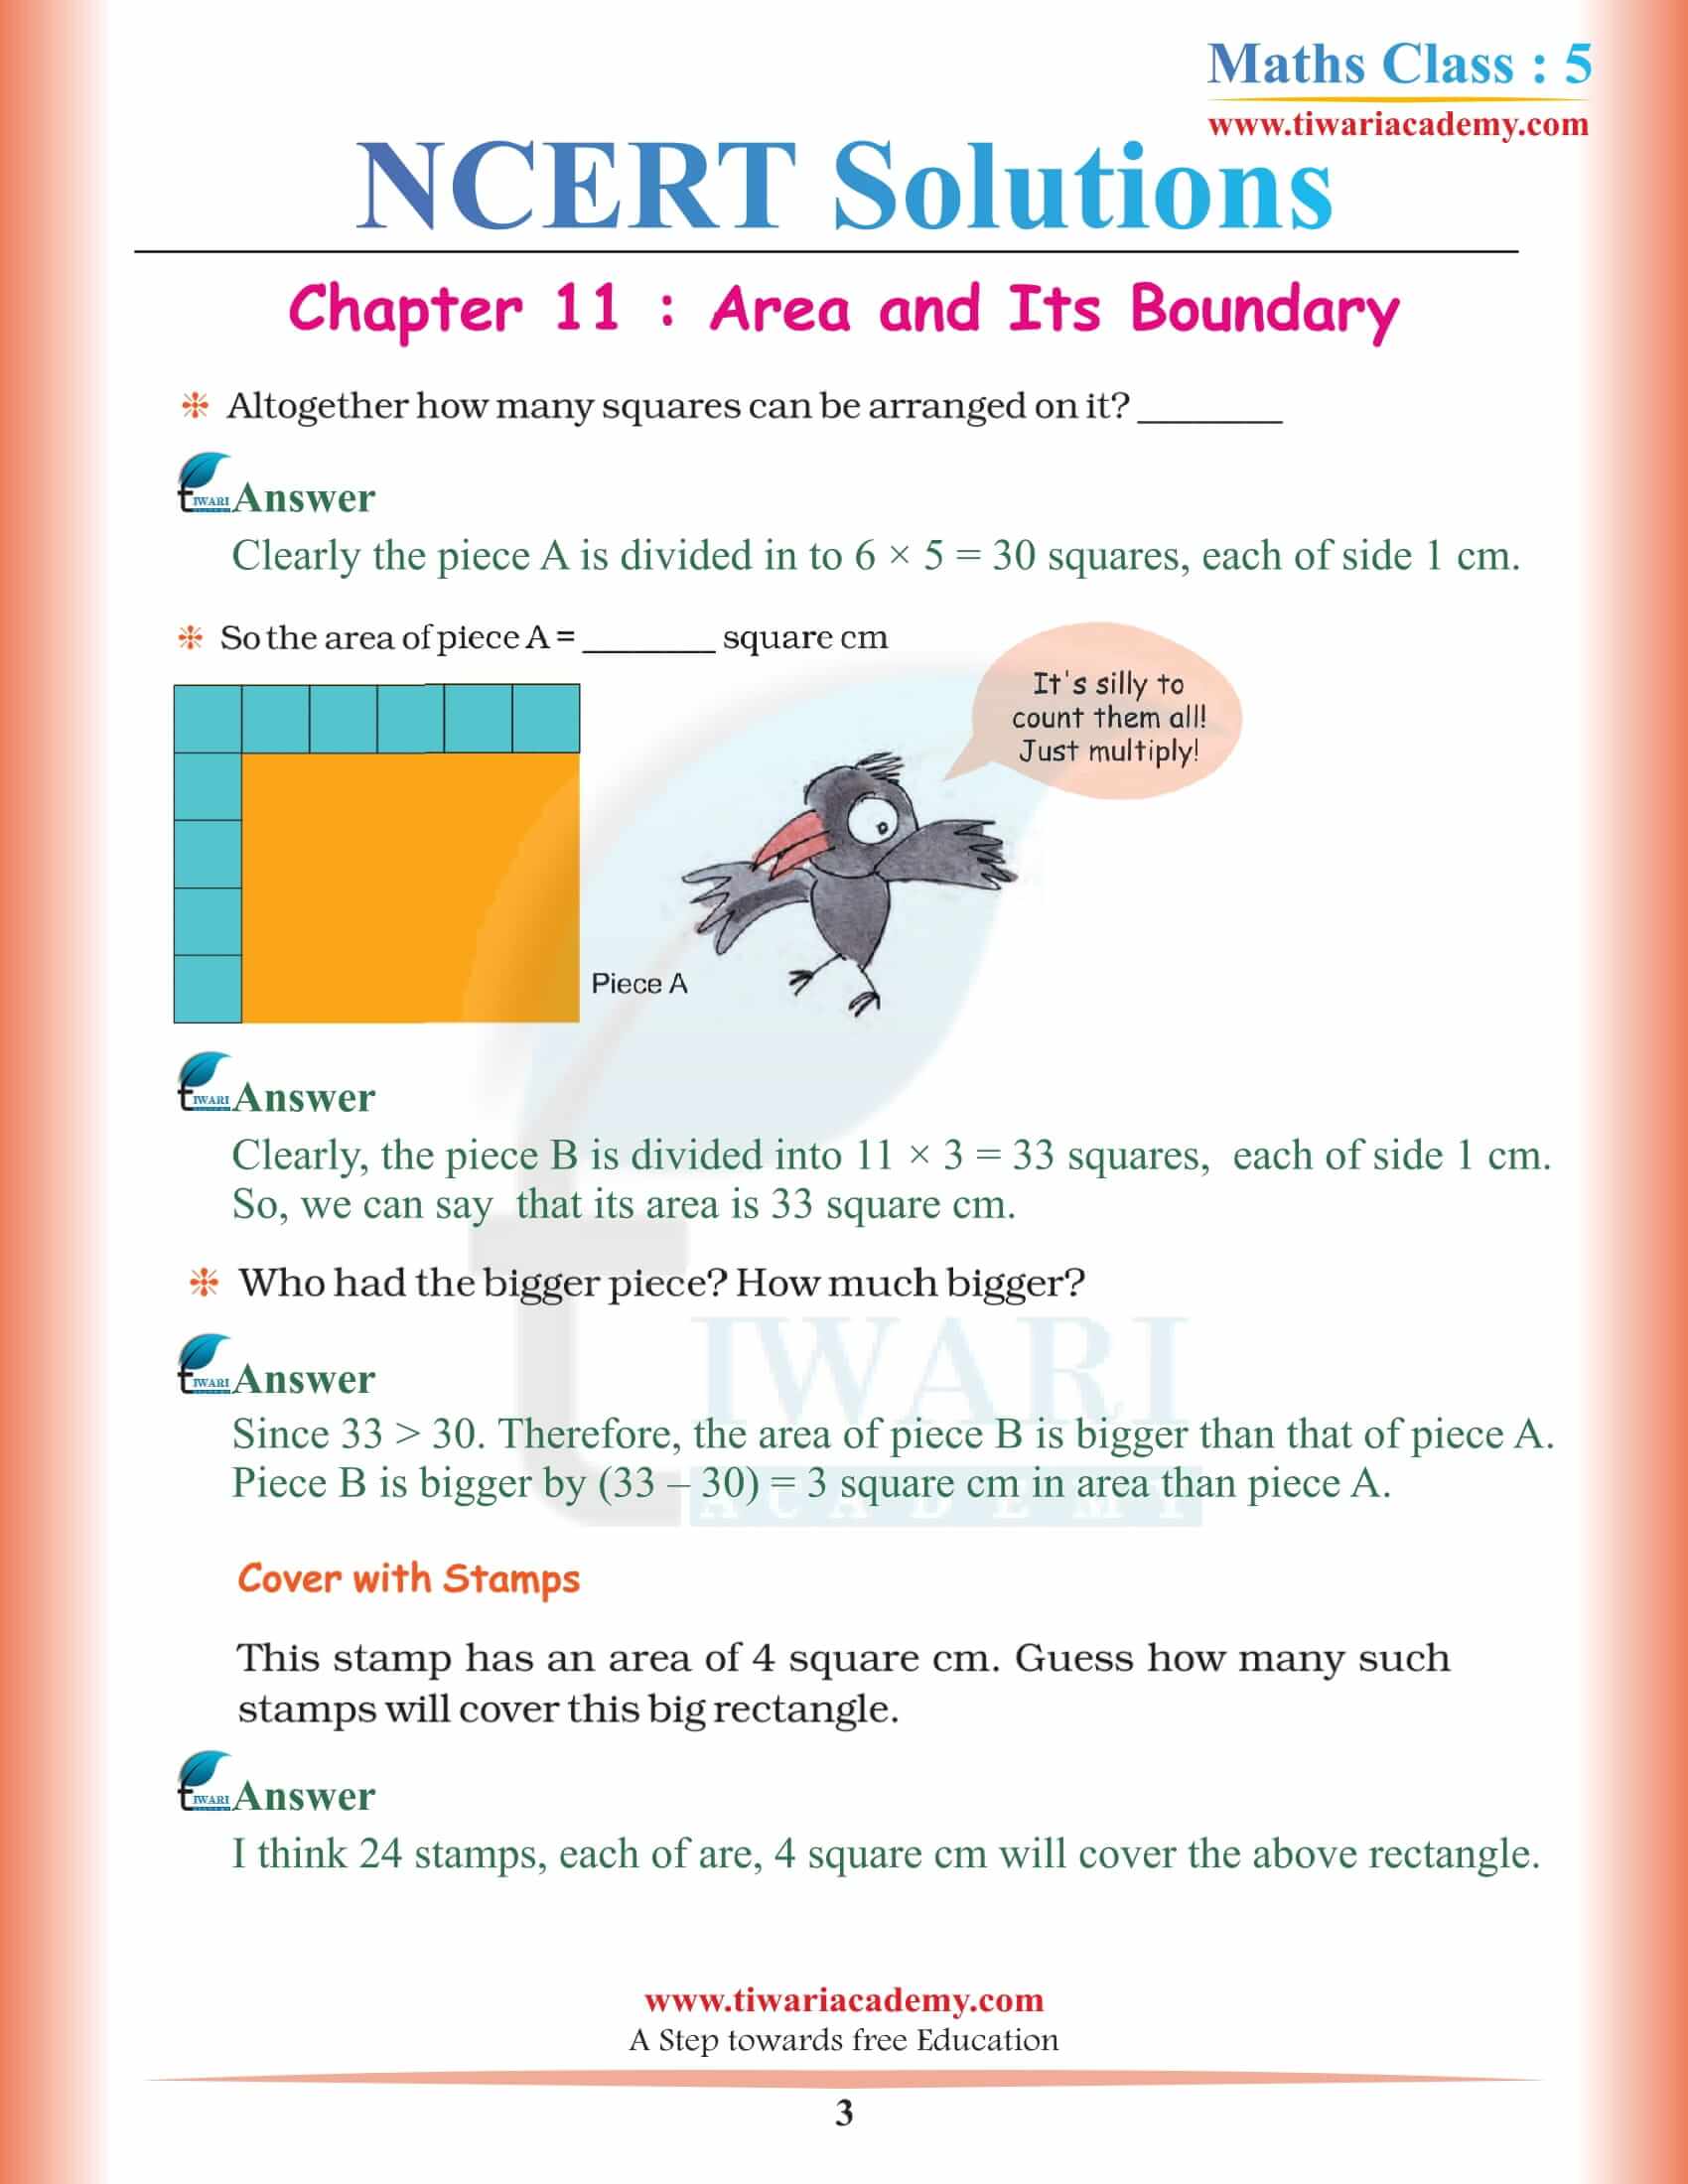 NCERT Solutions for Class 5 Maths Chapter 11 in English Medium